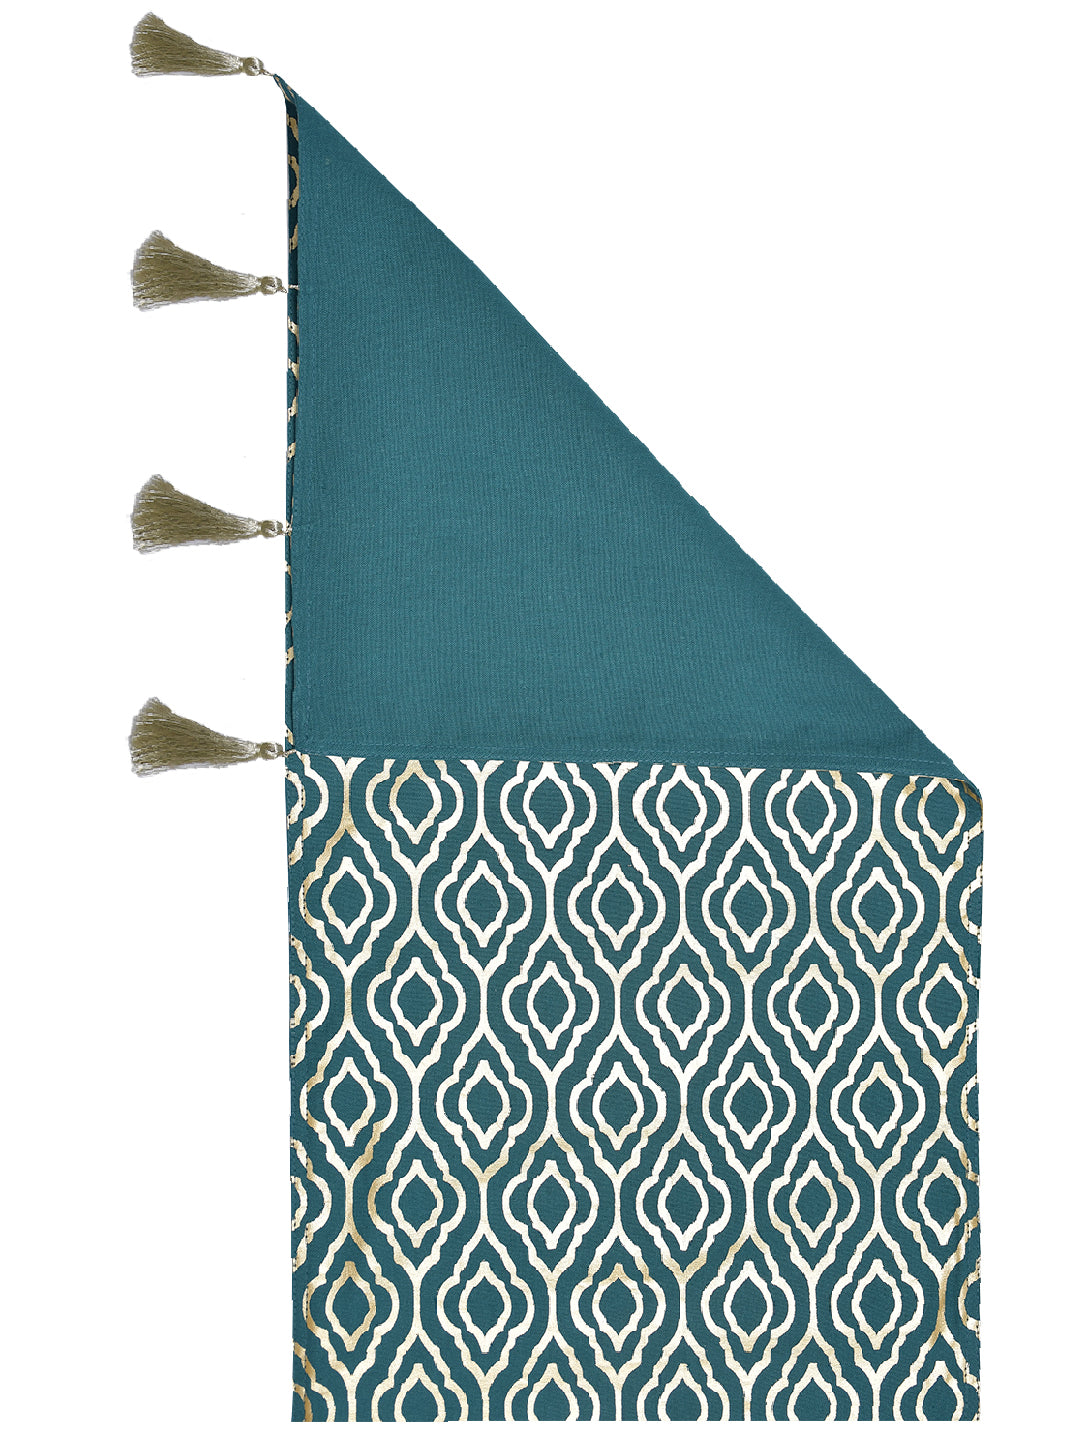 Roshan Teal Colored 100% Cotton Printed 4/6 Seater Table Runner